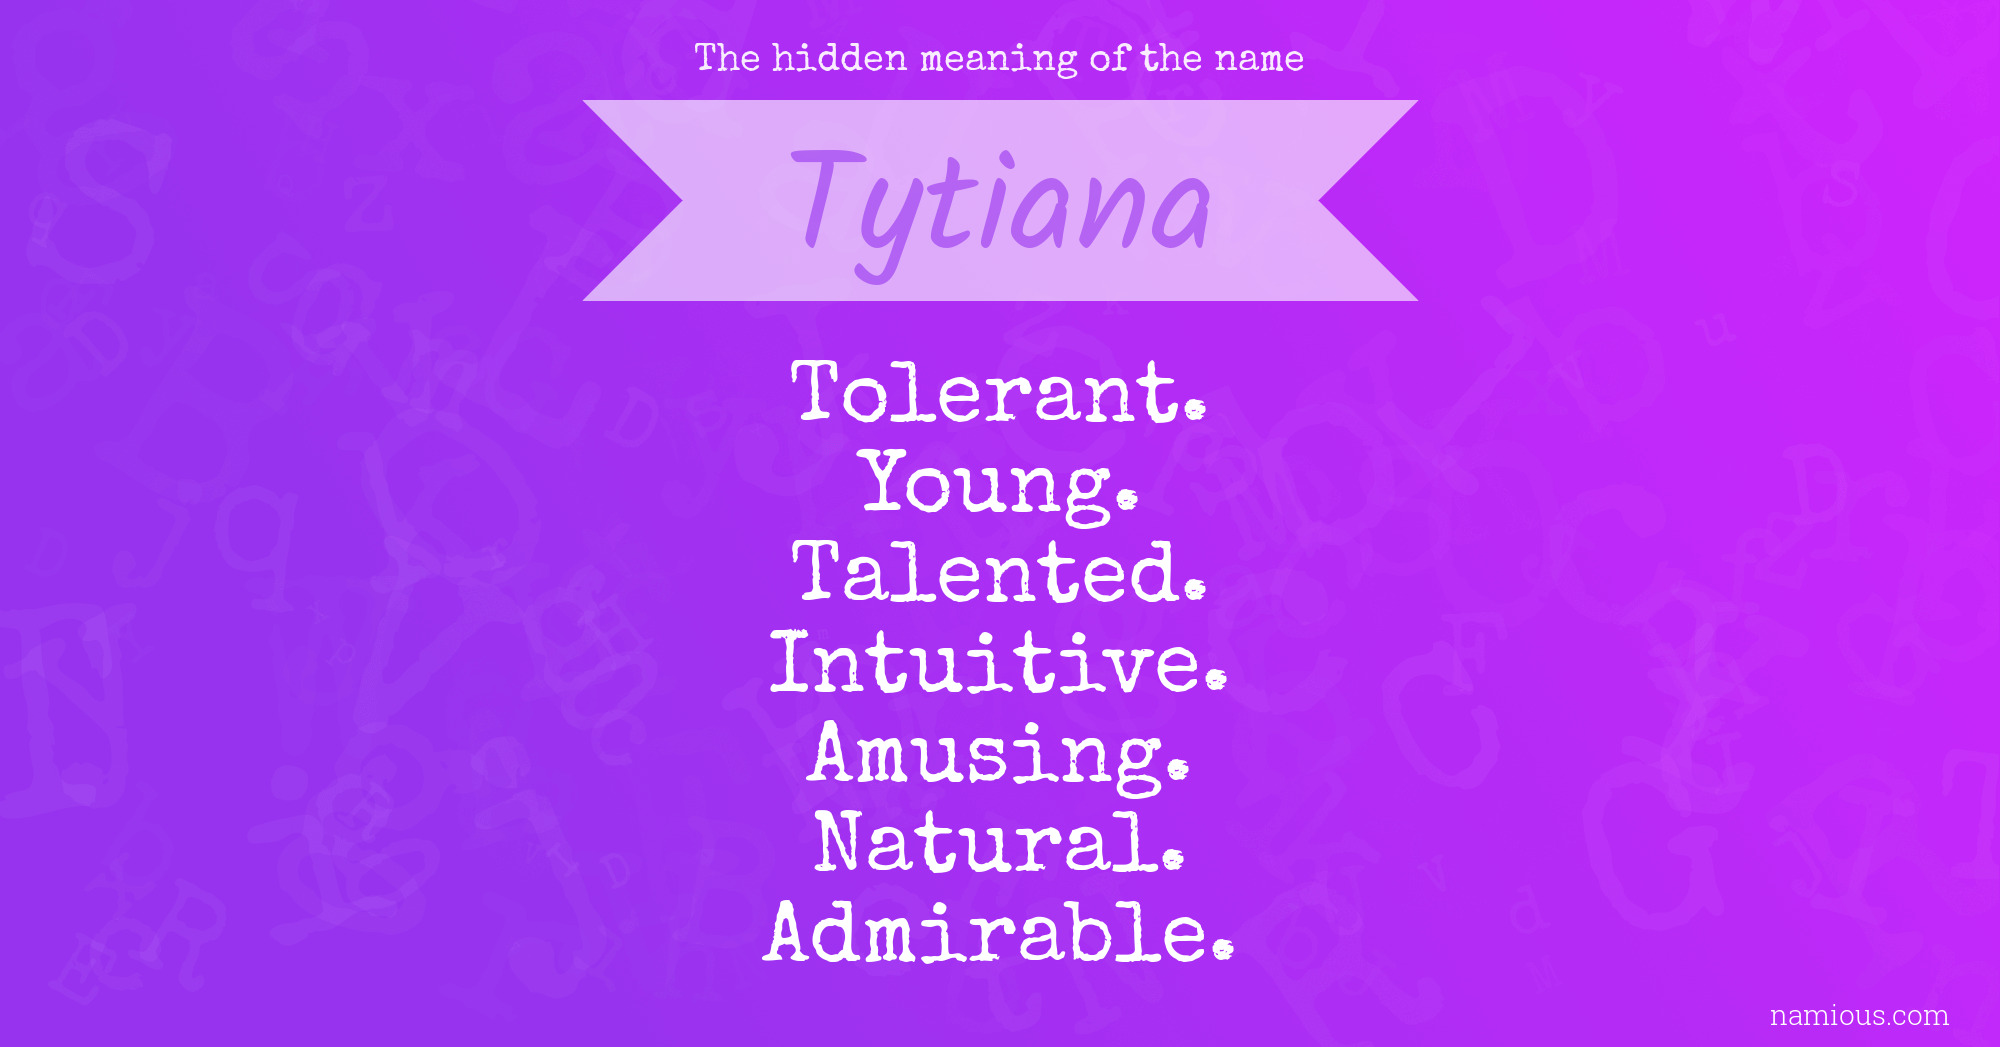 The hidden meaning of the name Tytiana